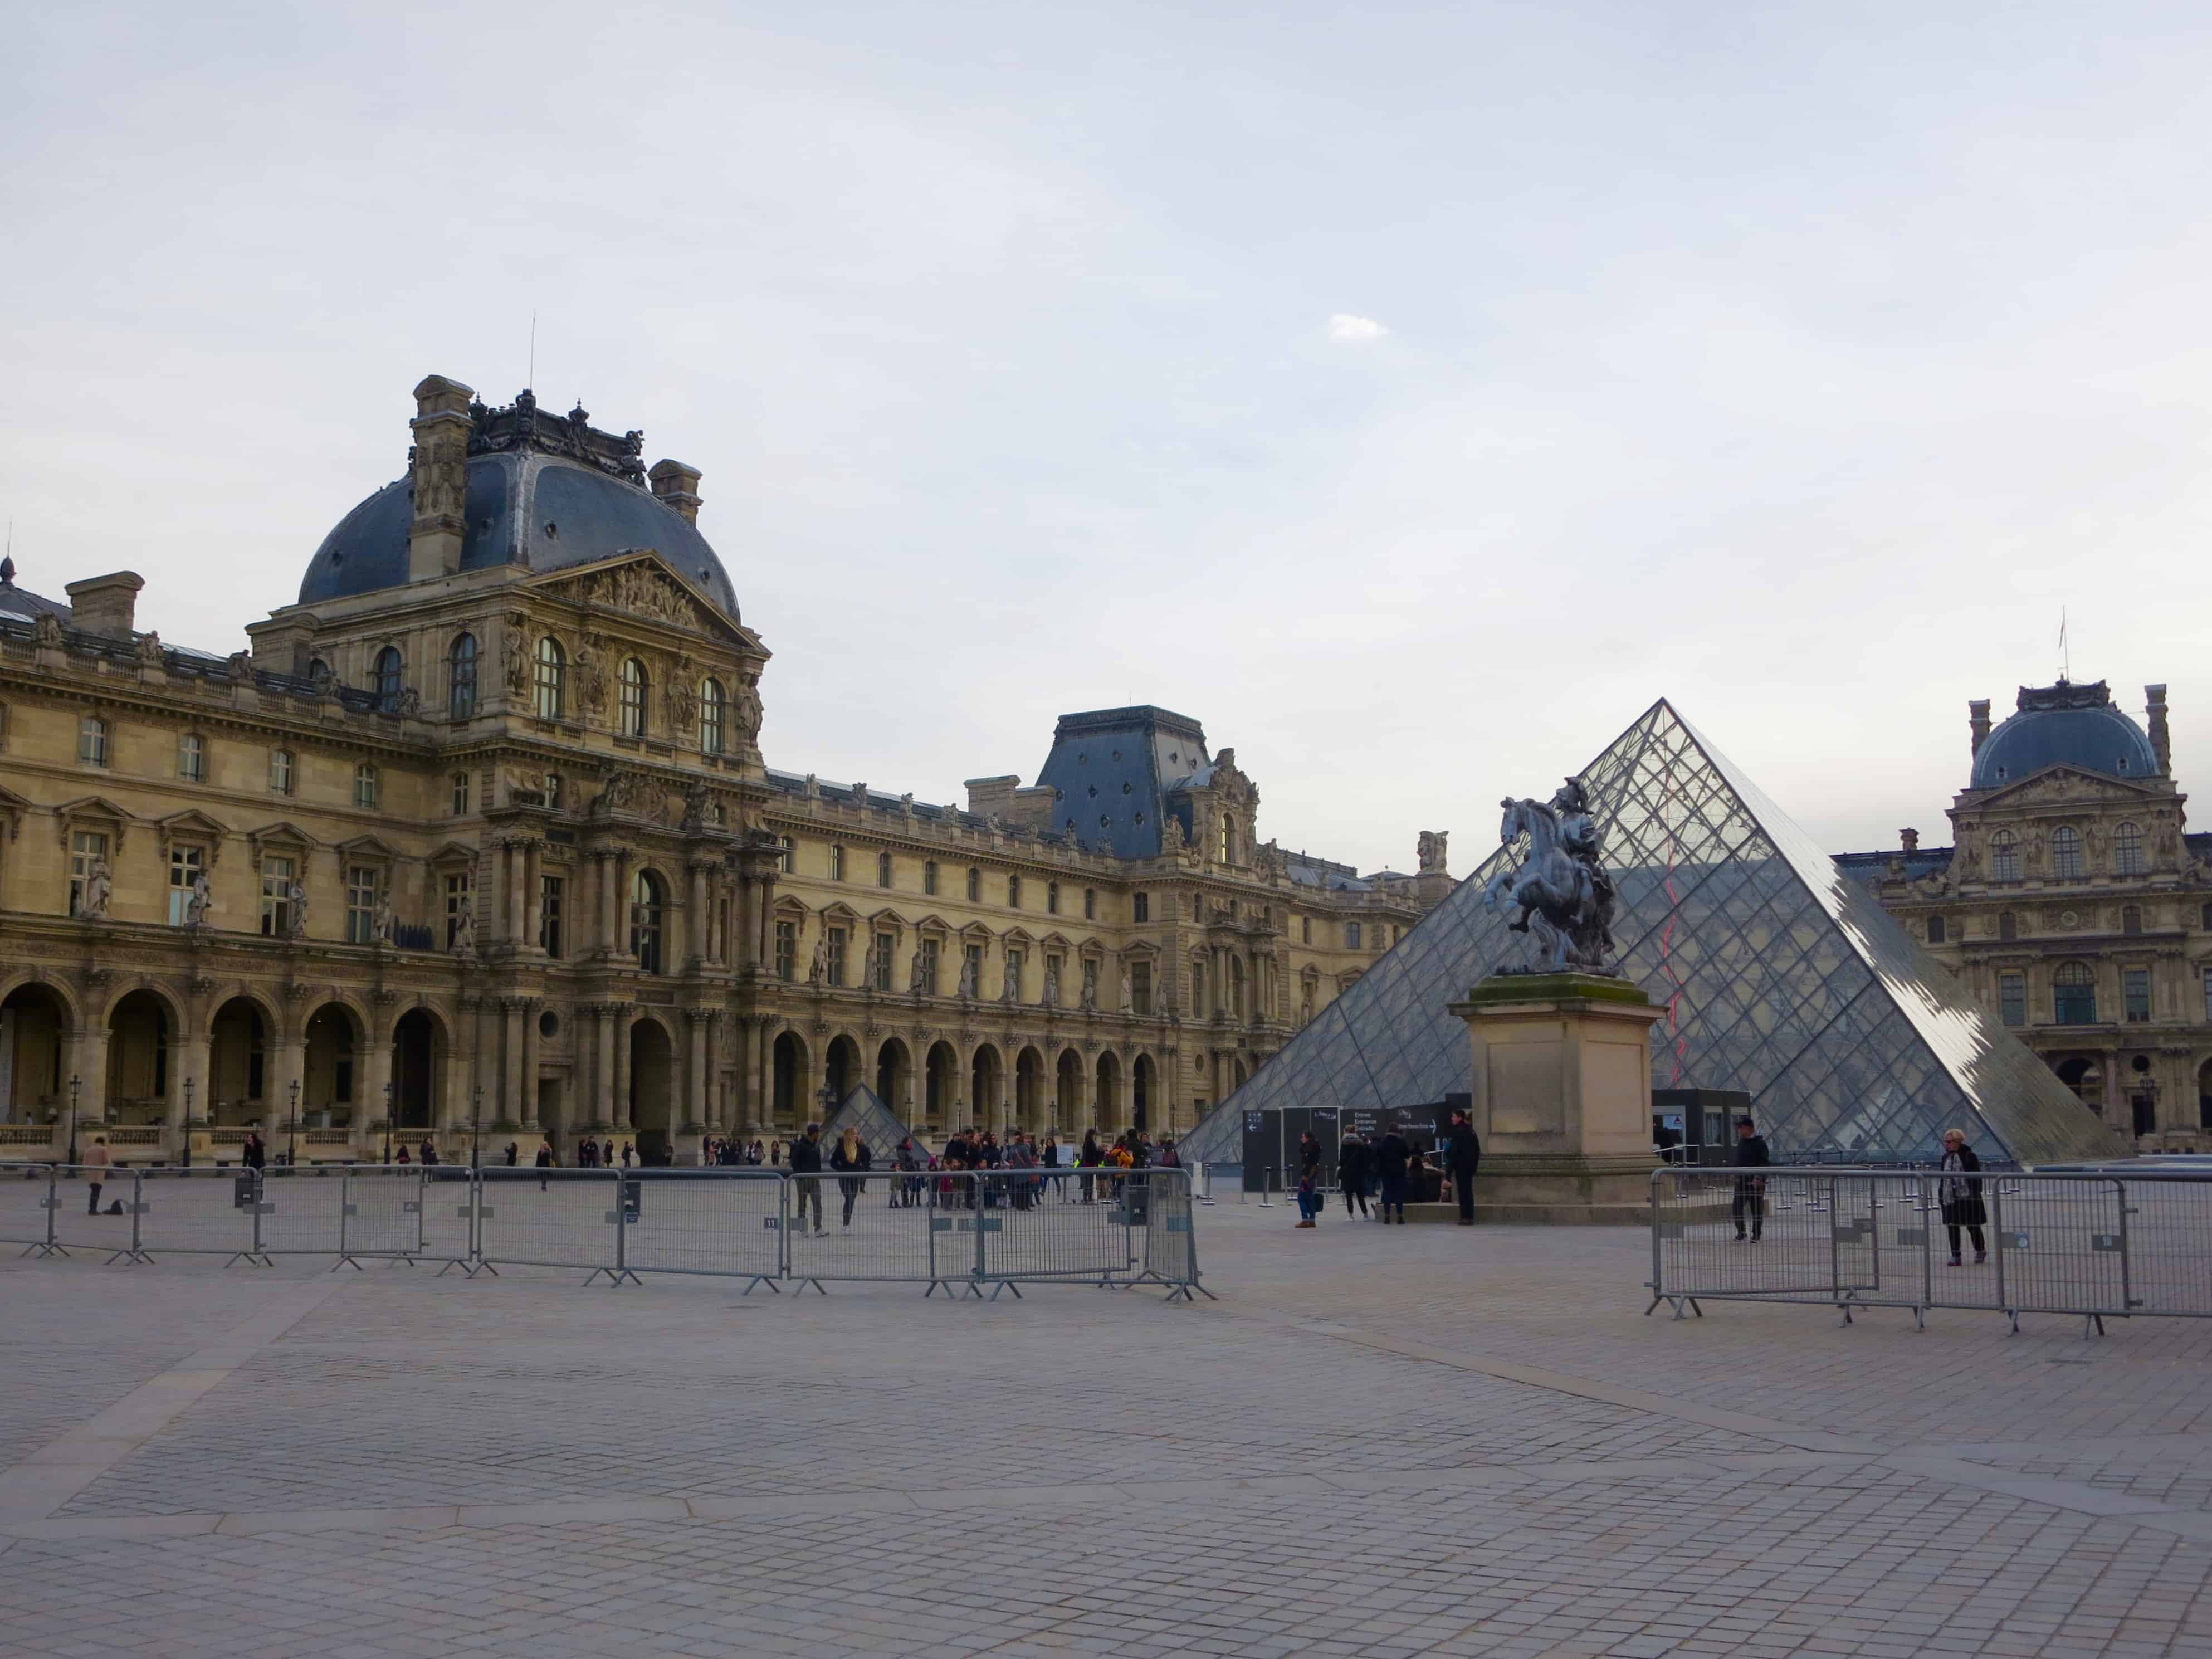 The Louvre early in the morning with no line